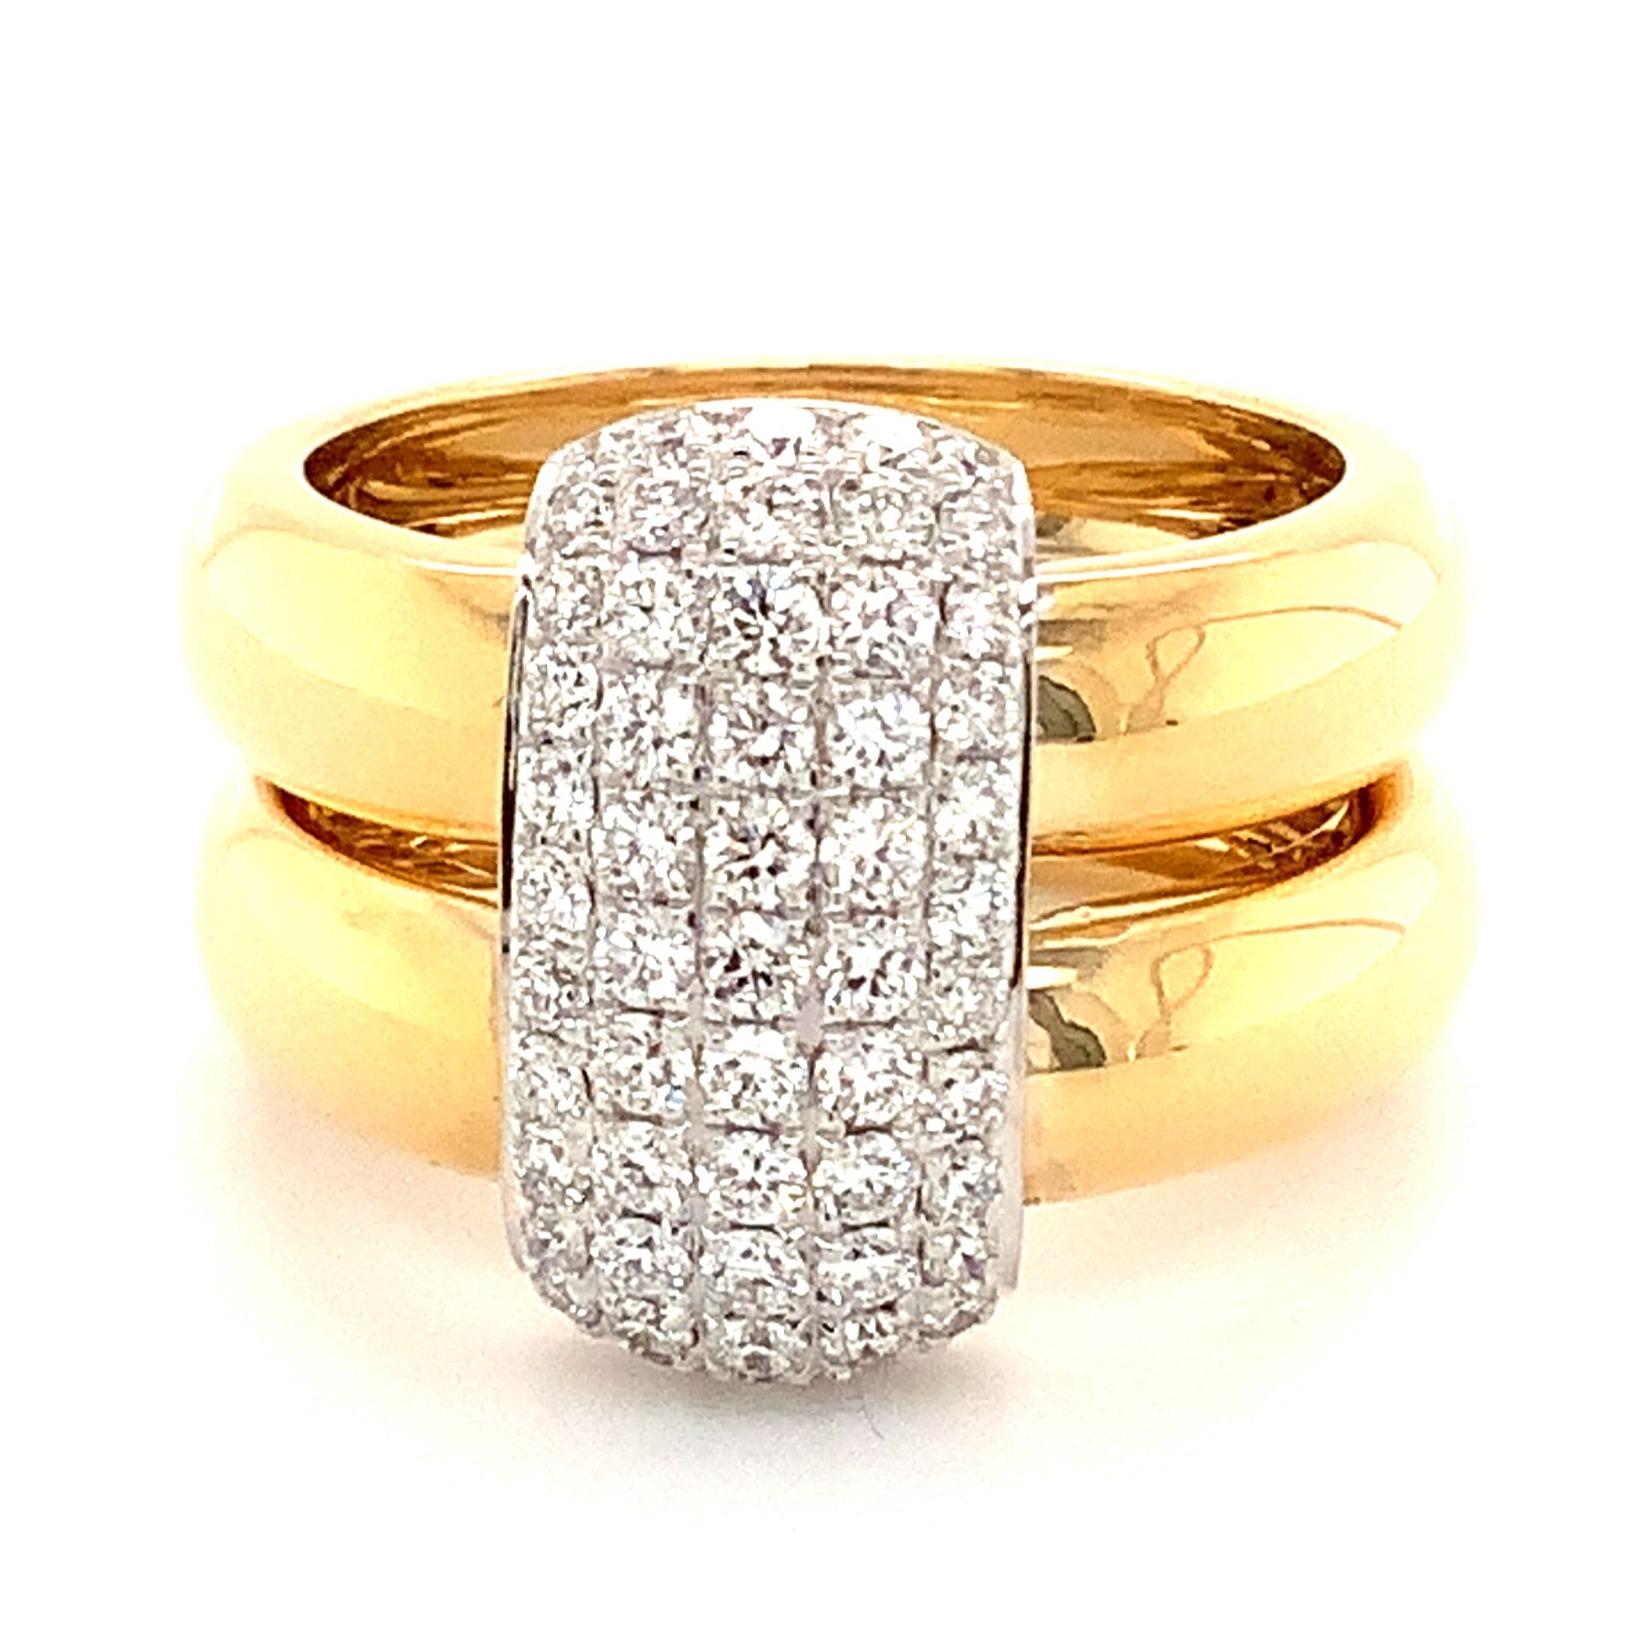 Afarin Collection 18K Highly Polished Two Tone 5 Row Pavé Diamond Double Band Ring
This Ring contains 60 Round Brilliant Cut Diamonds Equal to 0.85  cts T.W.
All the Diamonds are F in Color VS in Clarity  Excellent Make and Polish.
Diamond Section